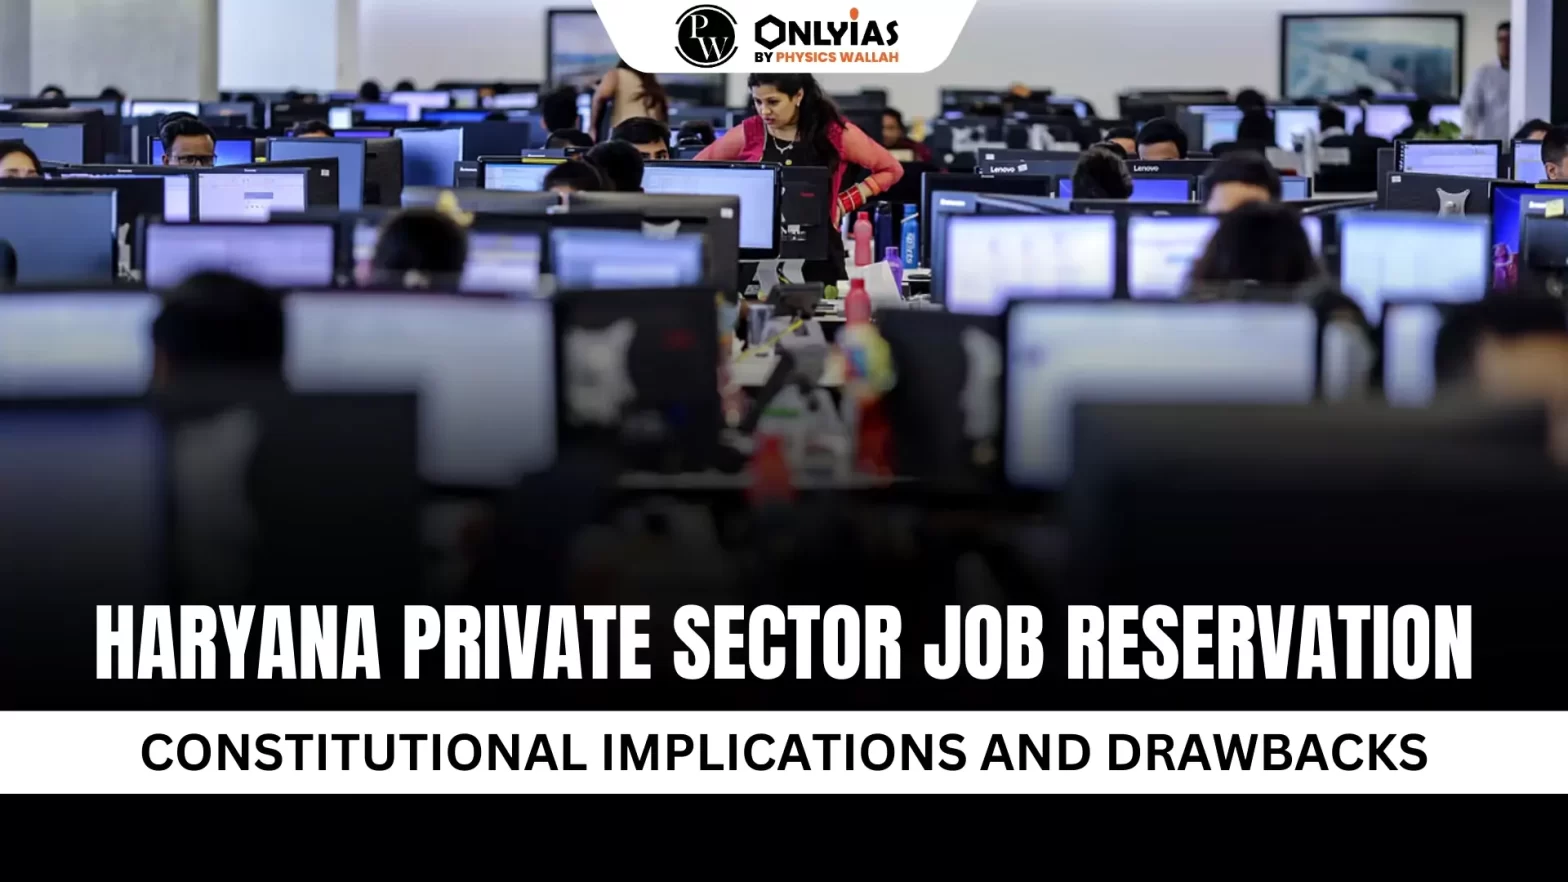 Haryana Private Sector Job Reservation: Constitutional Implications and Drawbacks